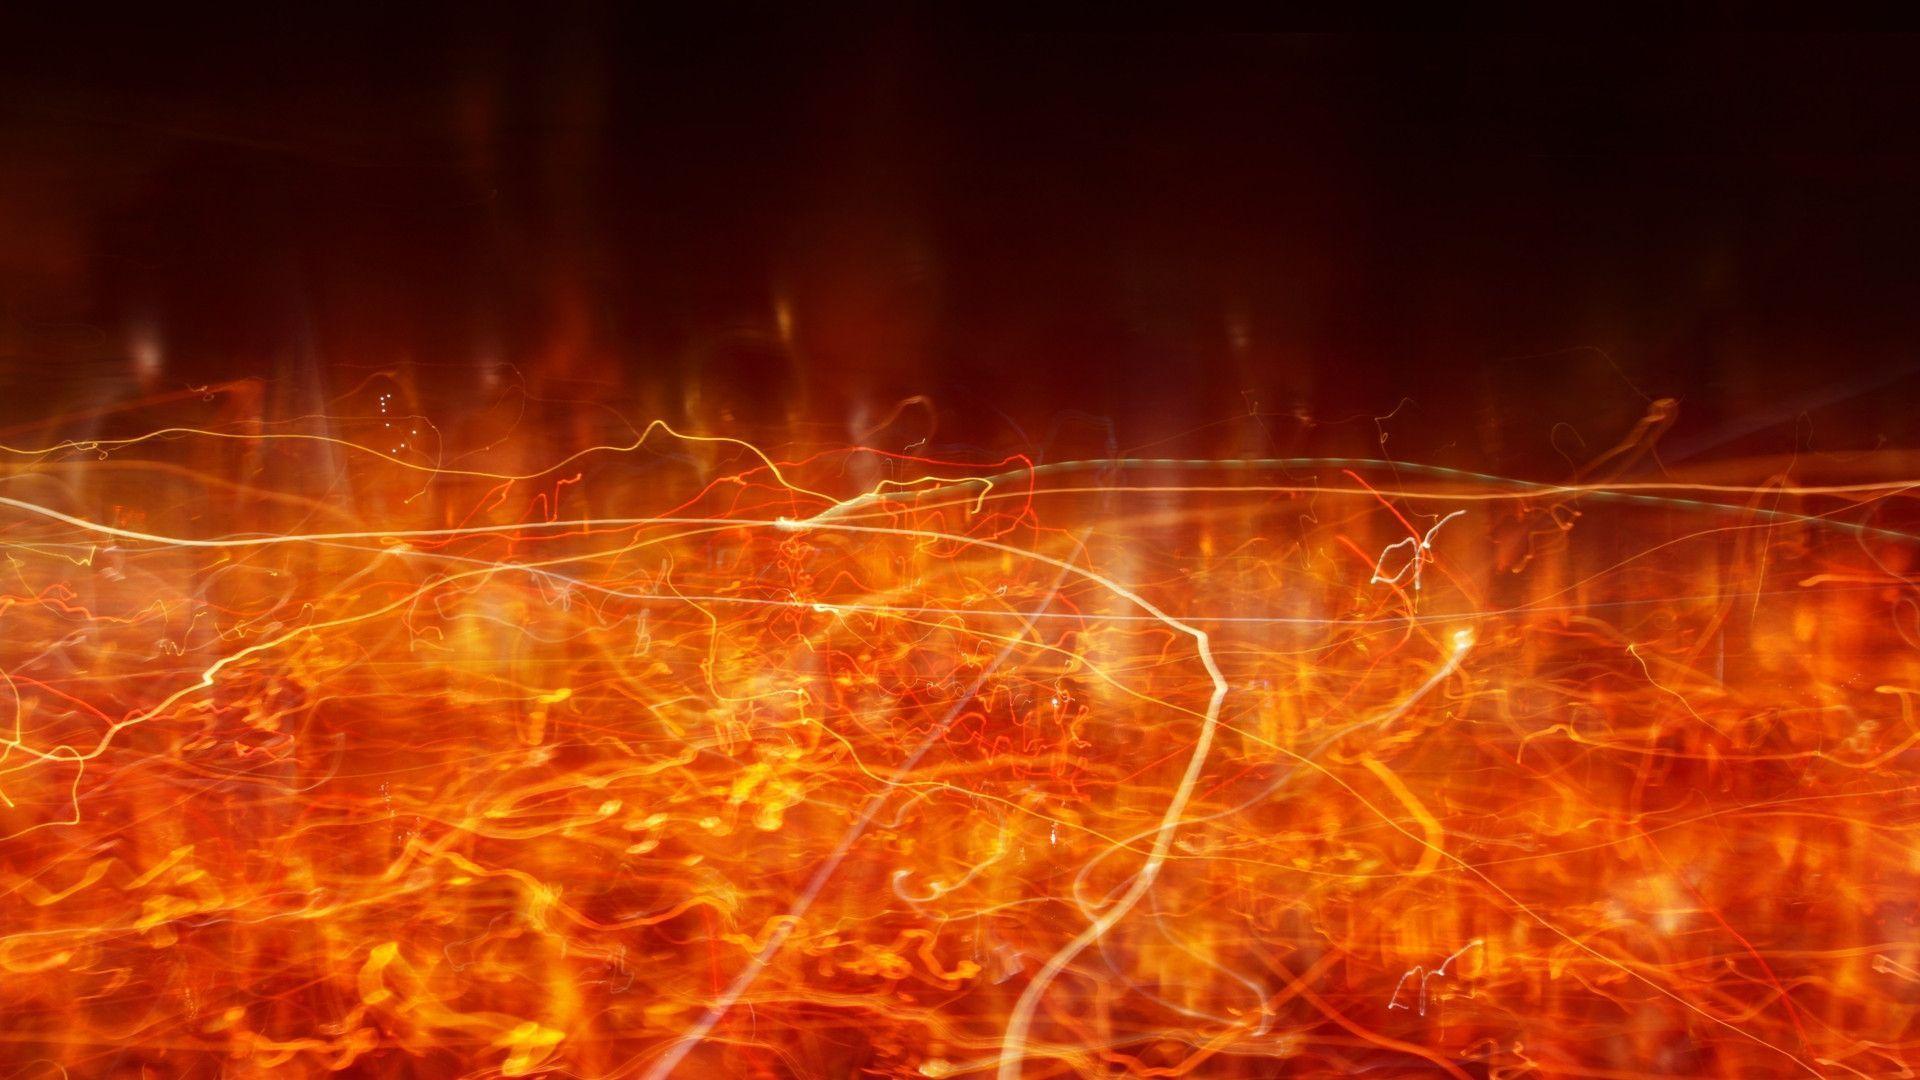 Surface Fire Background Wallpaper 1920x1080 px Free Download